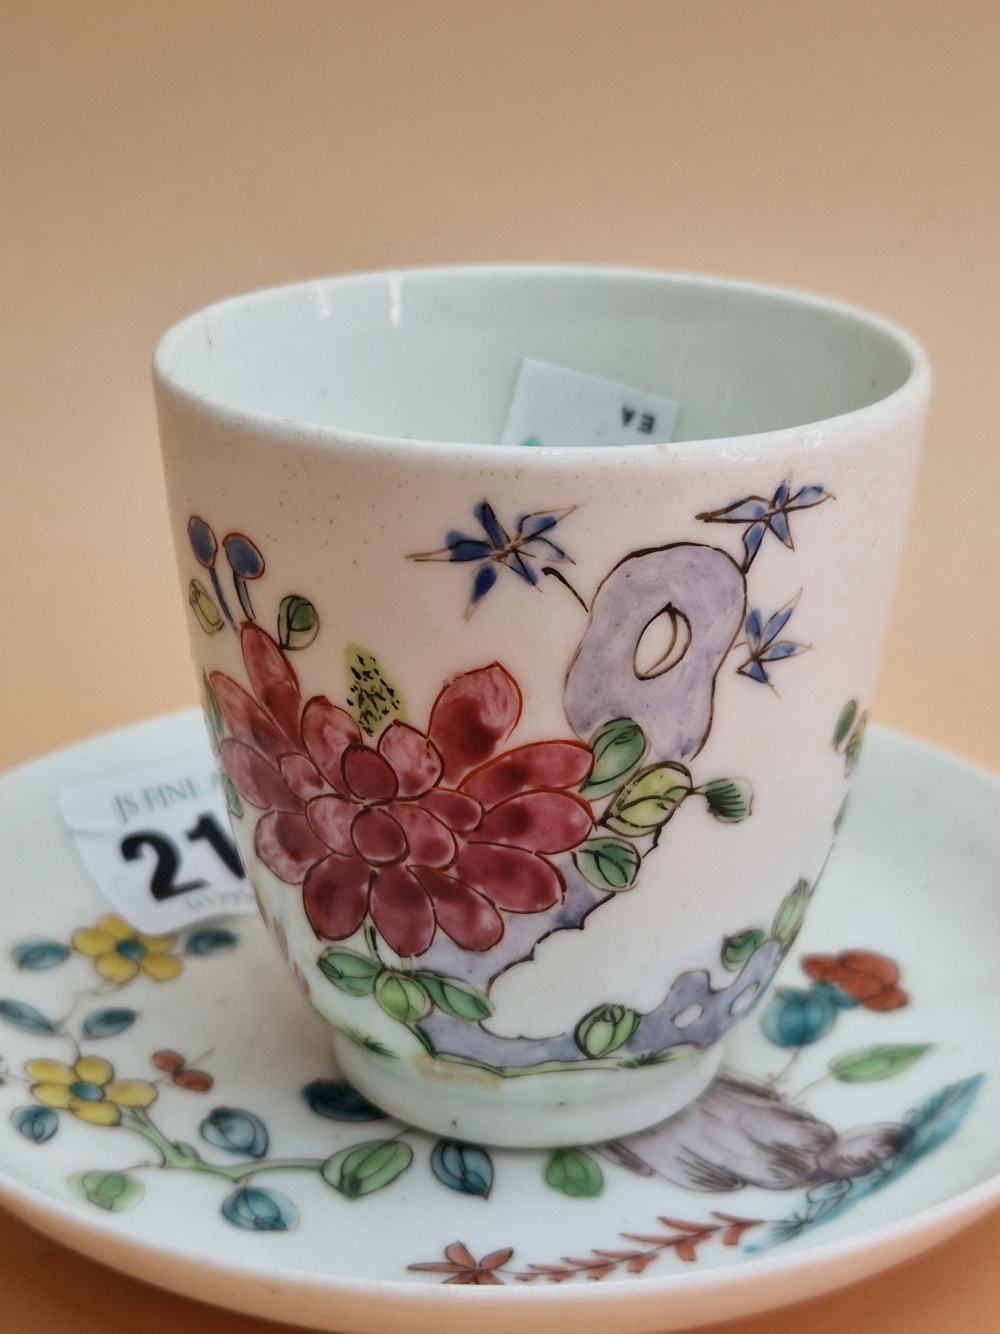 A BOW PORCELAIN COFFEE CUP AND SAUCER PAINTED WITH FLOWERS GROWING BY ROCKS - Image 3 of 6